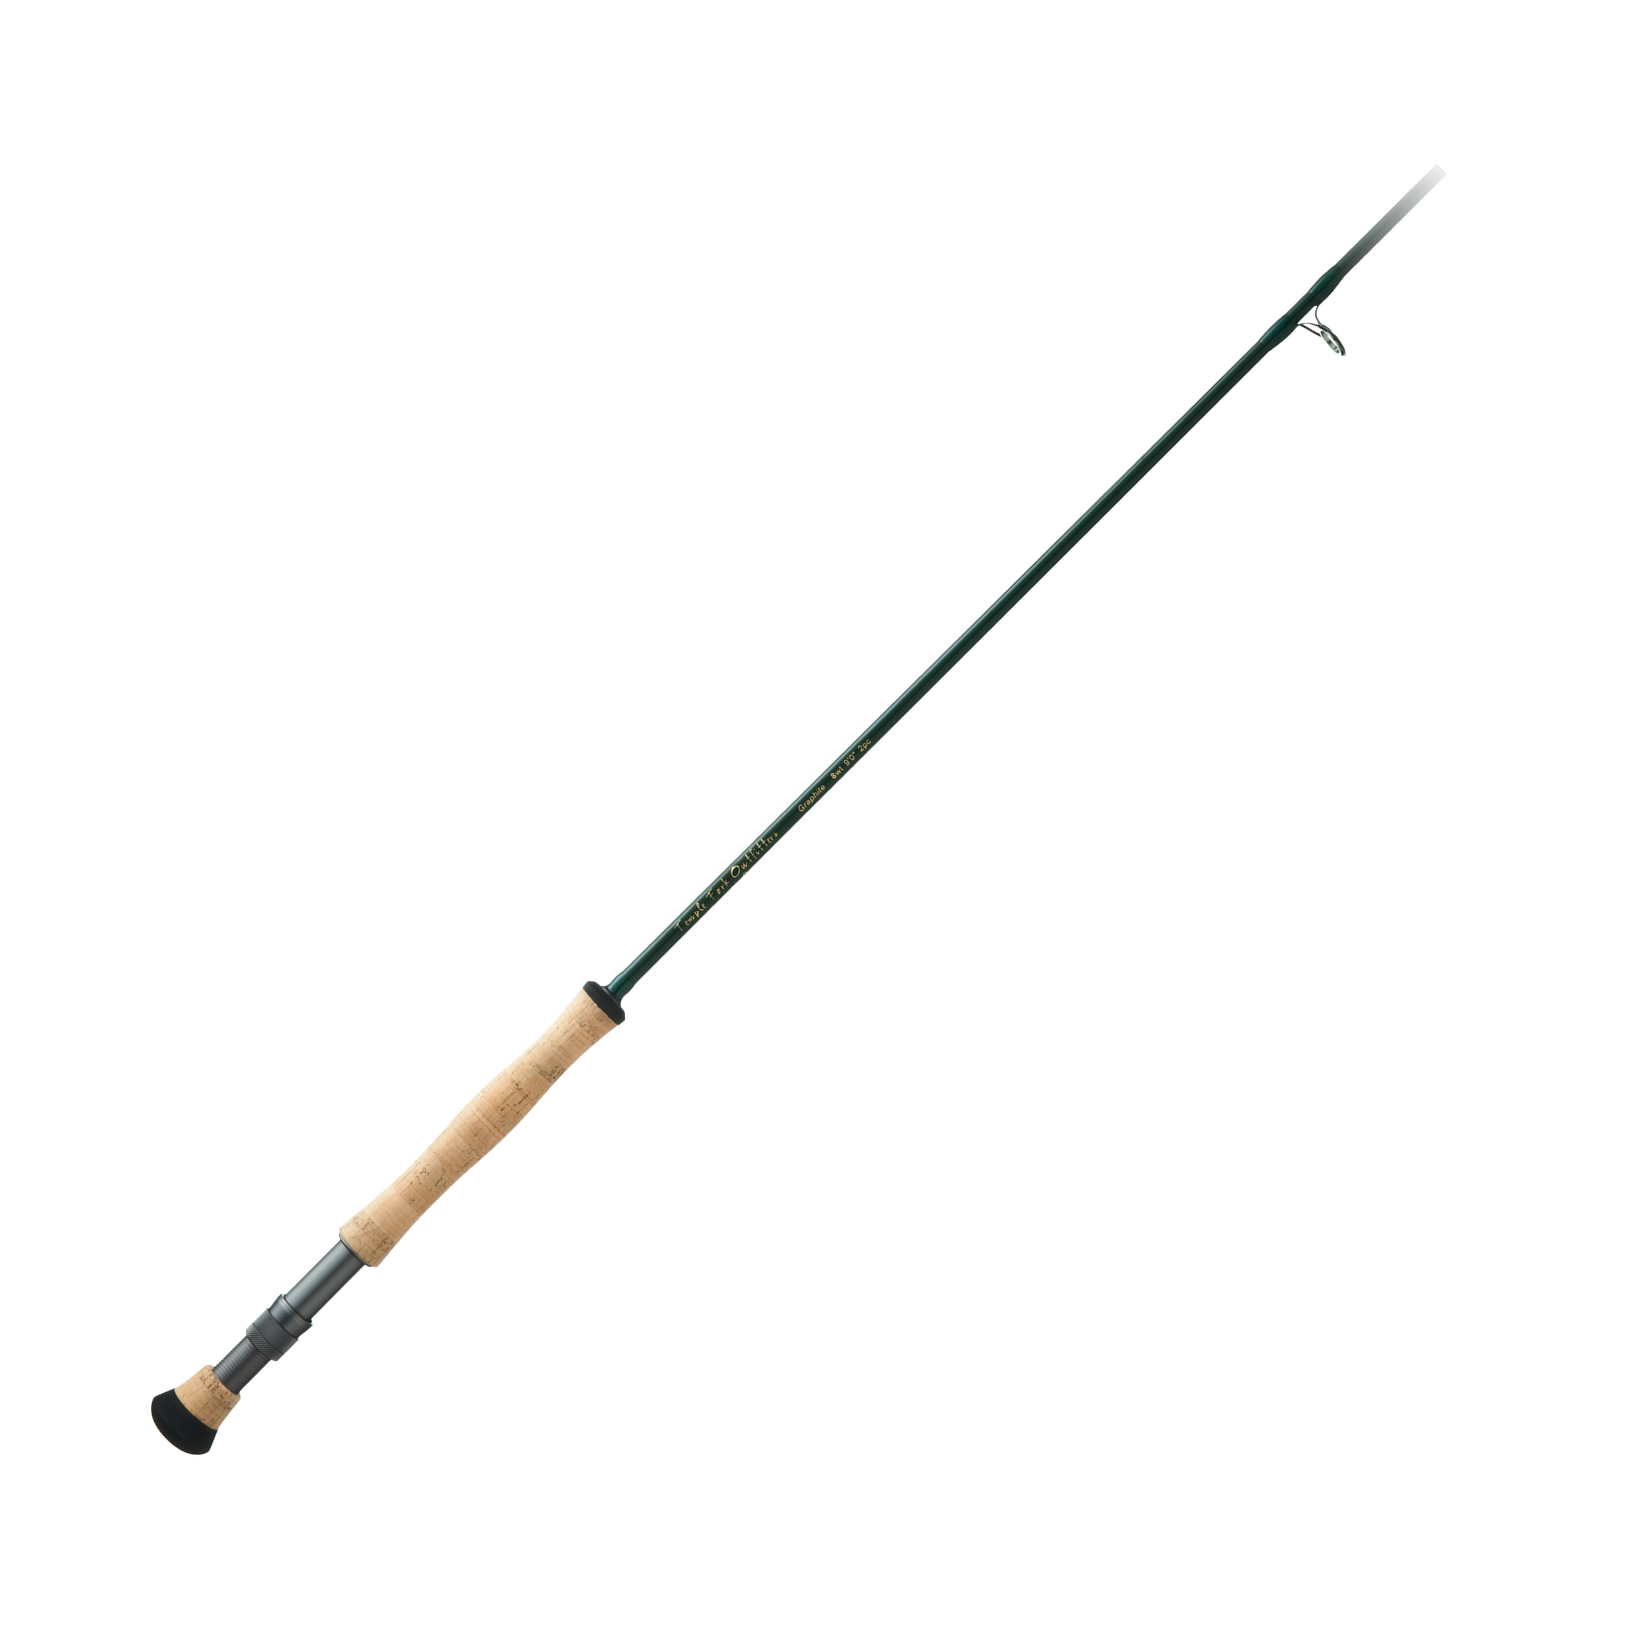 Temple Fork Outfitters Signature II Series Fly Rod - 8'6″ - 4 wt.